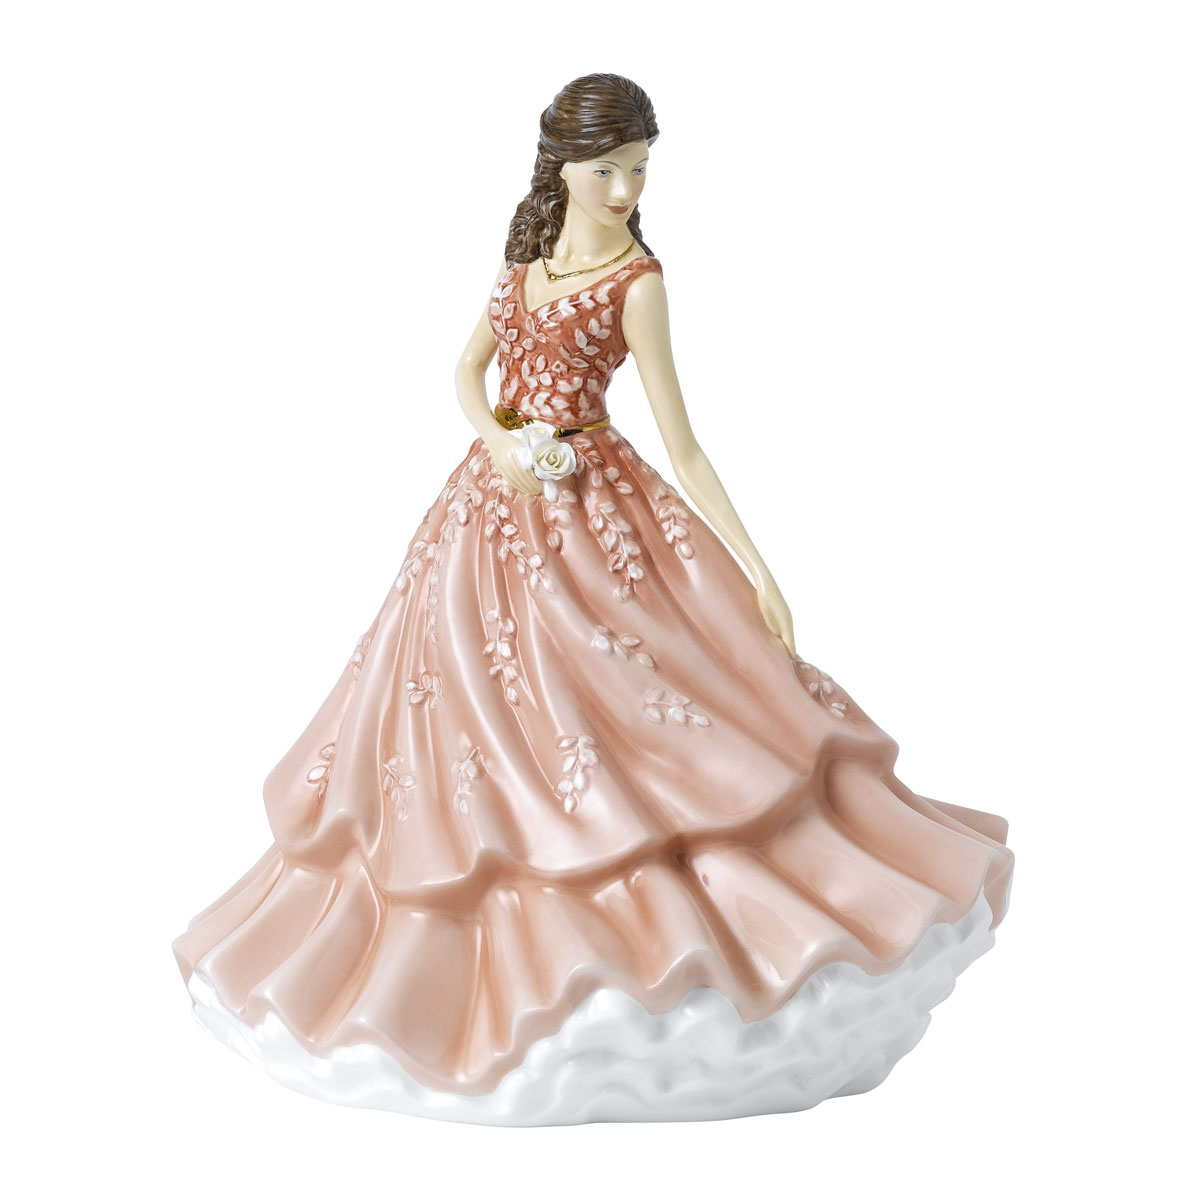 Royal Doulton Millie, Michael Doulton Figure of the Year 2021